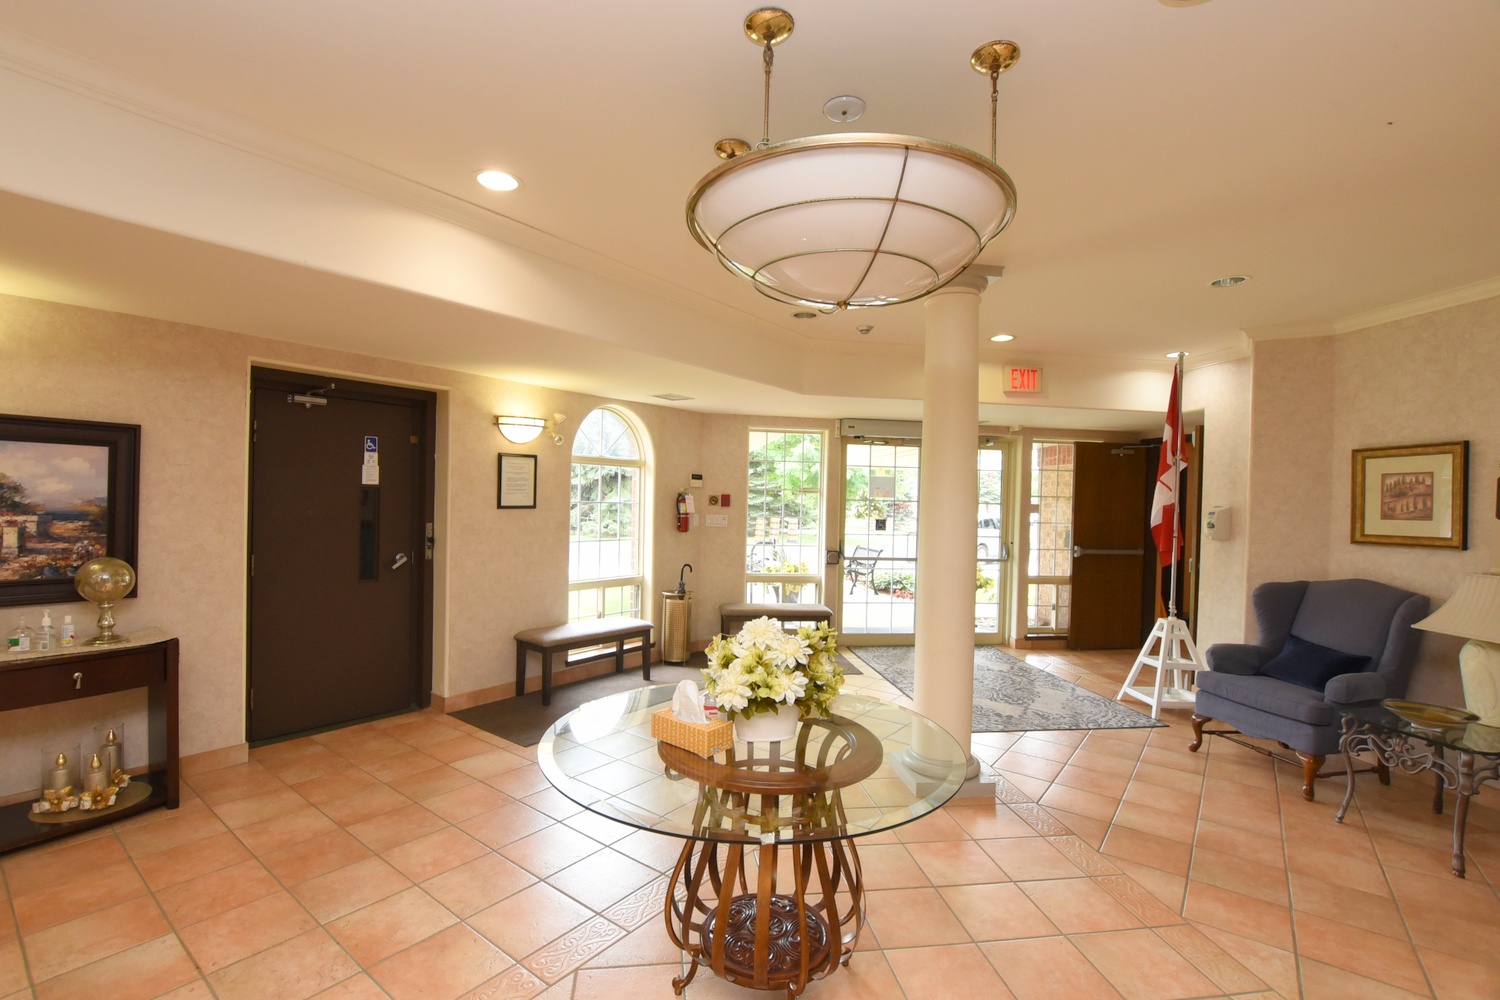 Clubhouse - Foyer